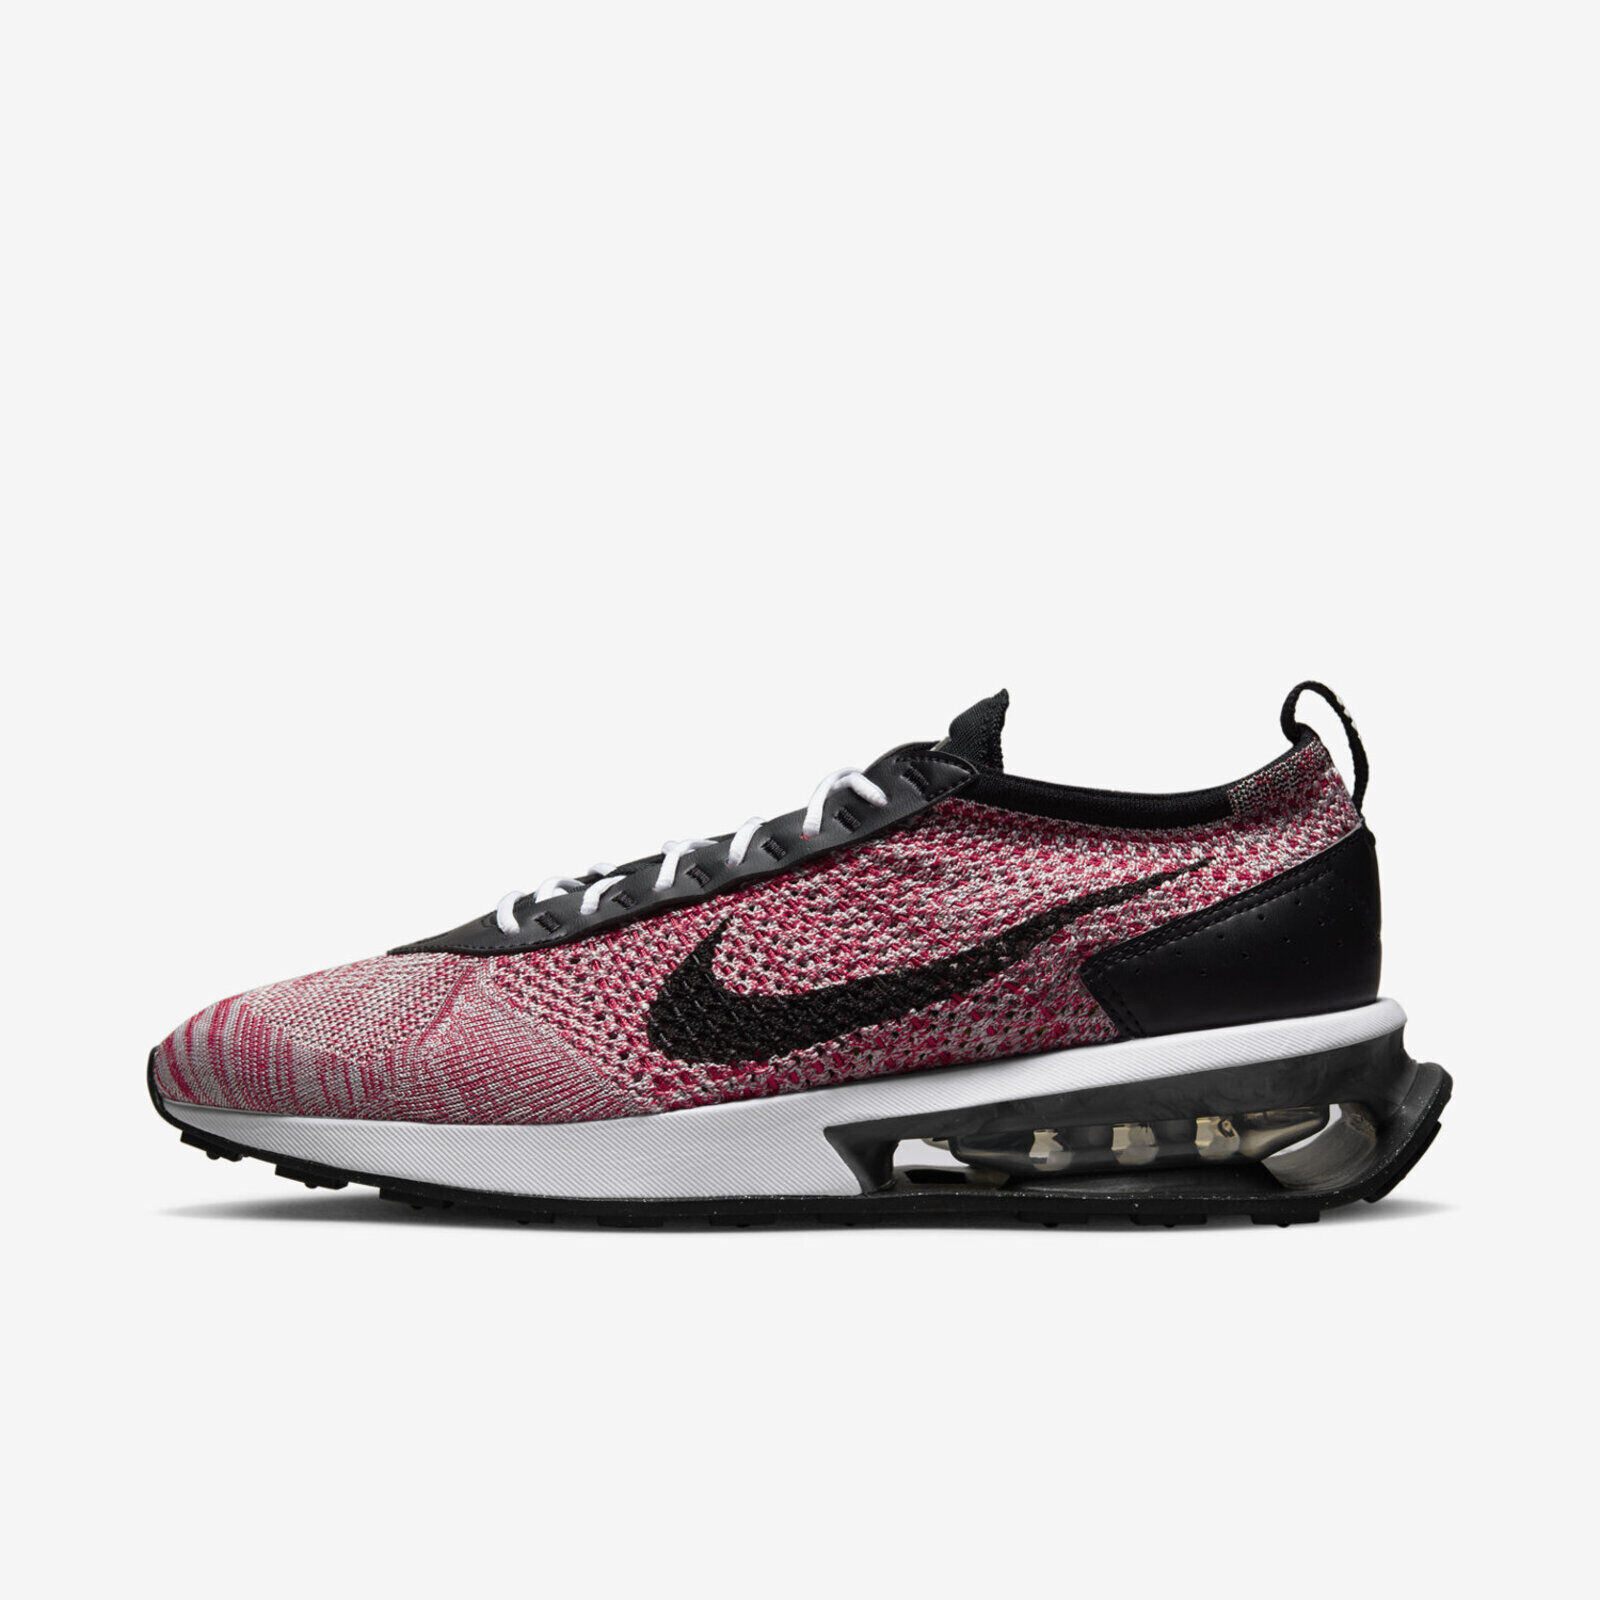 Nike Air Max Flyknit Racer [FD2764-600] Shoes | eBay